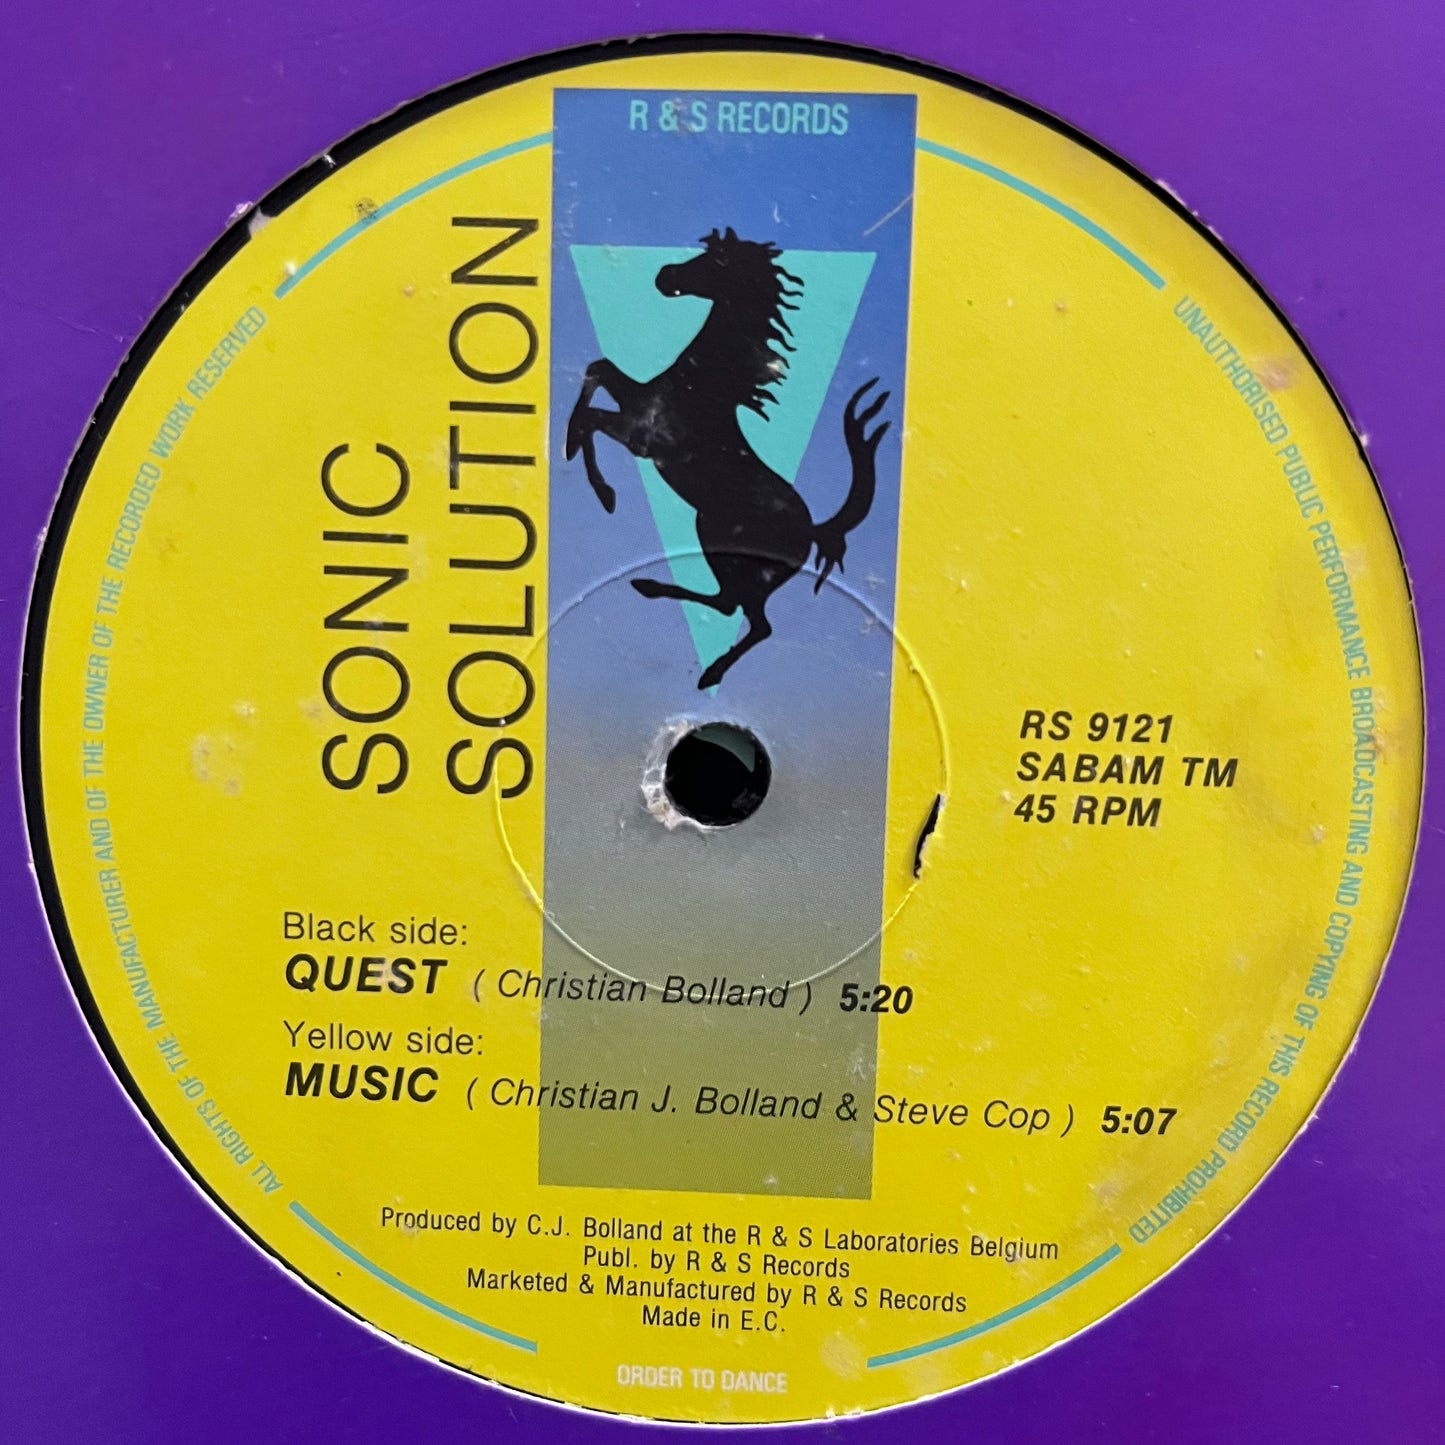 Sonic Solution “Music” / “Quest” 2 Track 12inch Vinyl Record on R&S Records